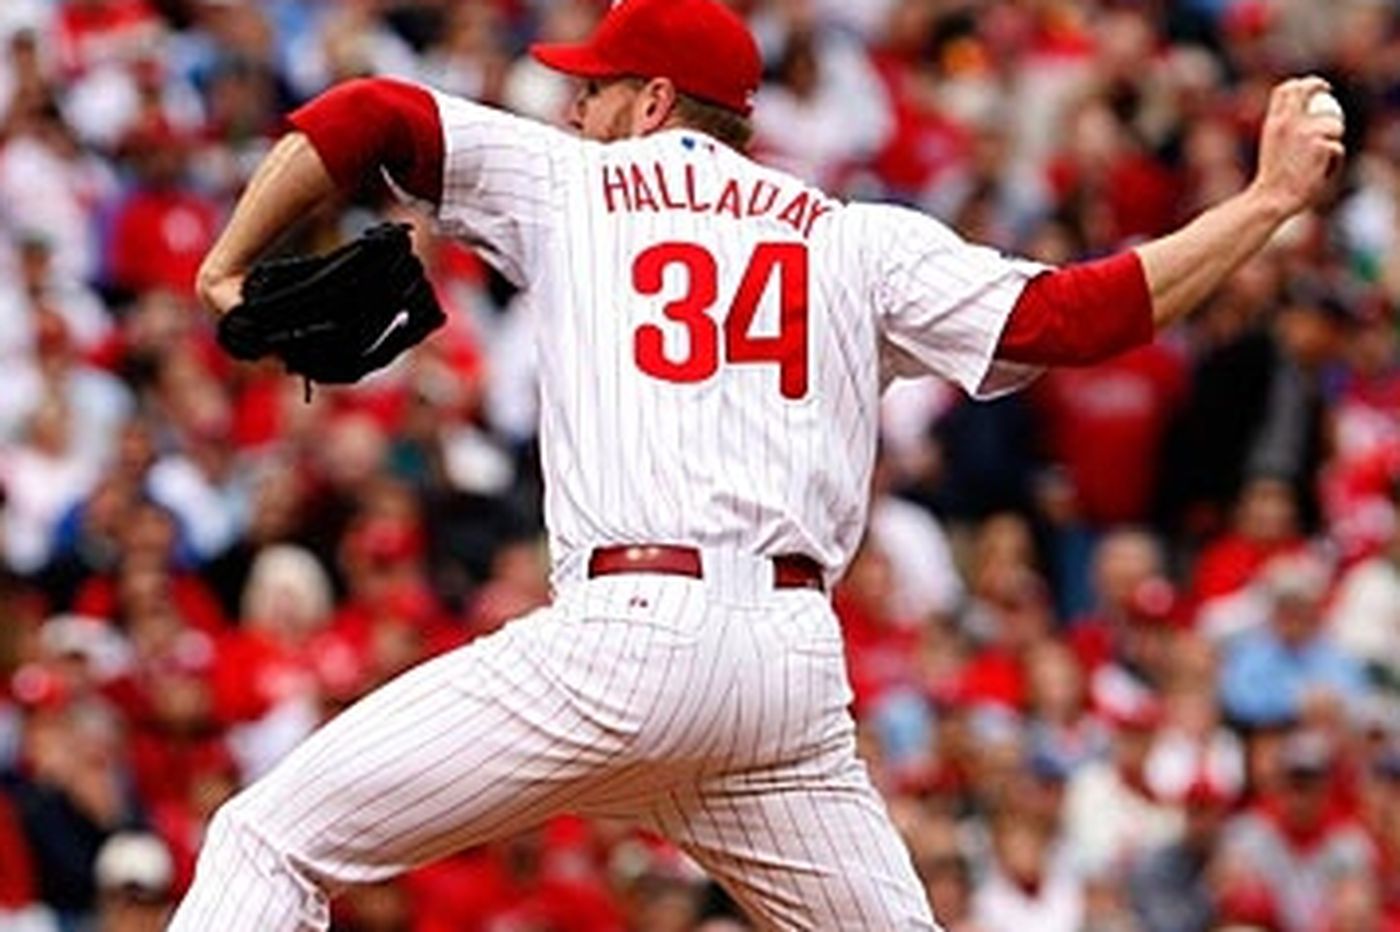 Roy Halladay’s imperfections revealed in book and documentary about his life and death | Bob Brookover